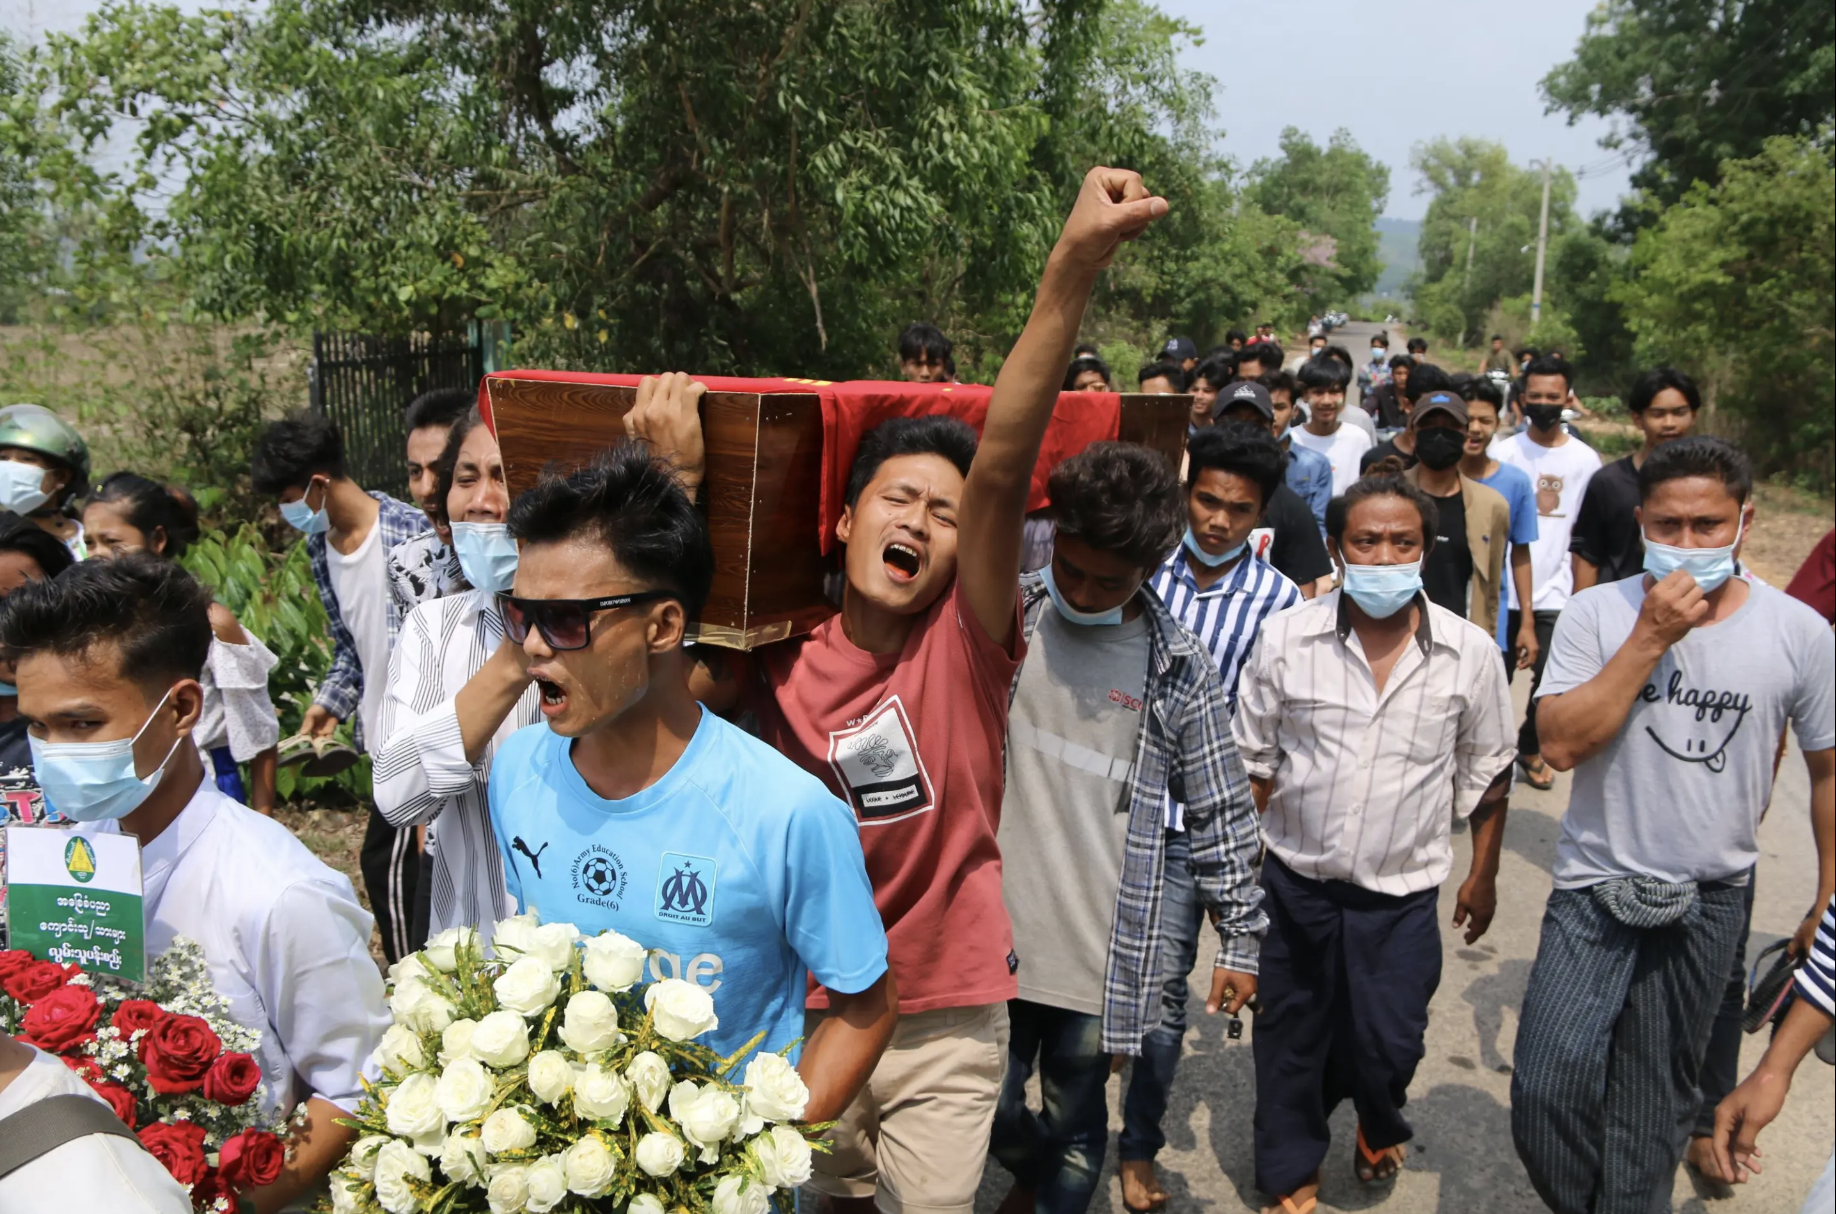 A funeral procession depicts a group of people carrying a coffin. One man has his fist in the air. People are crying.